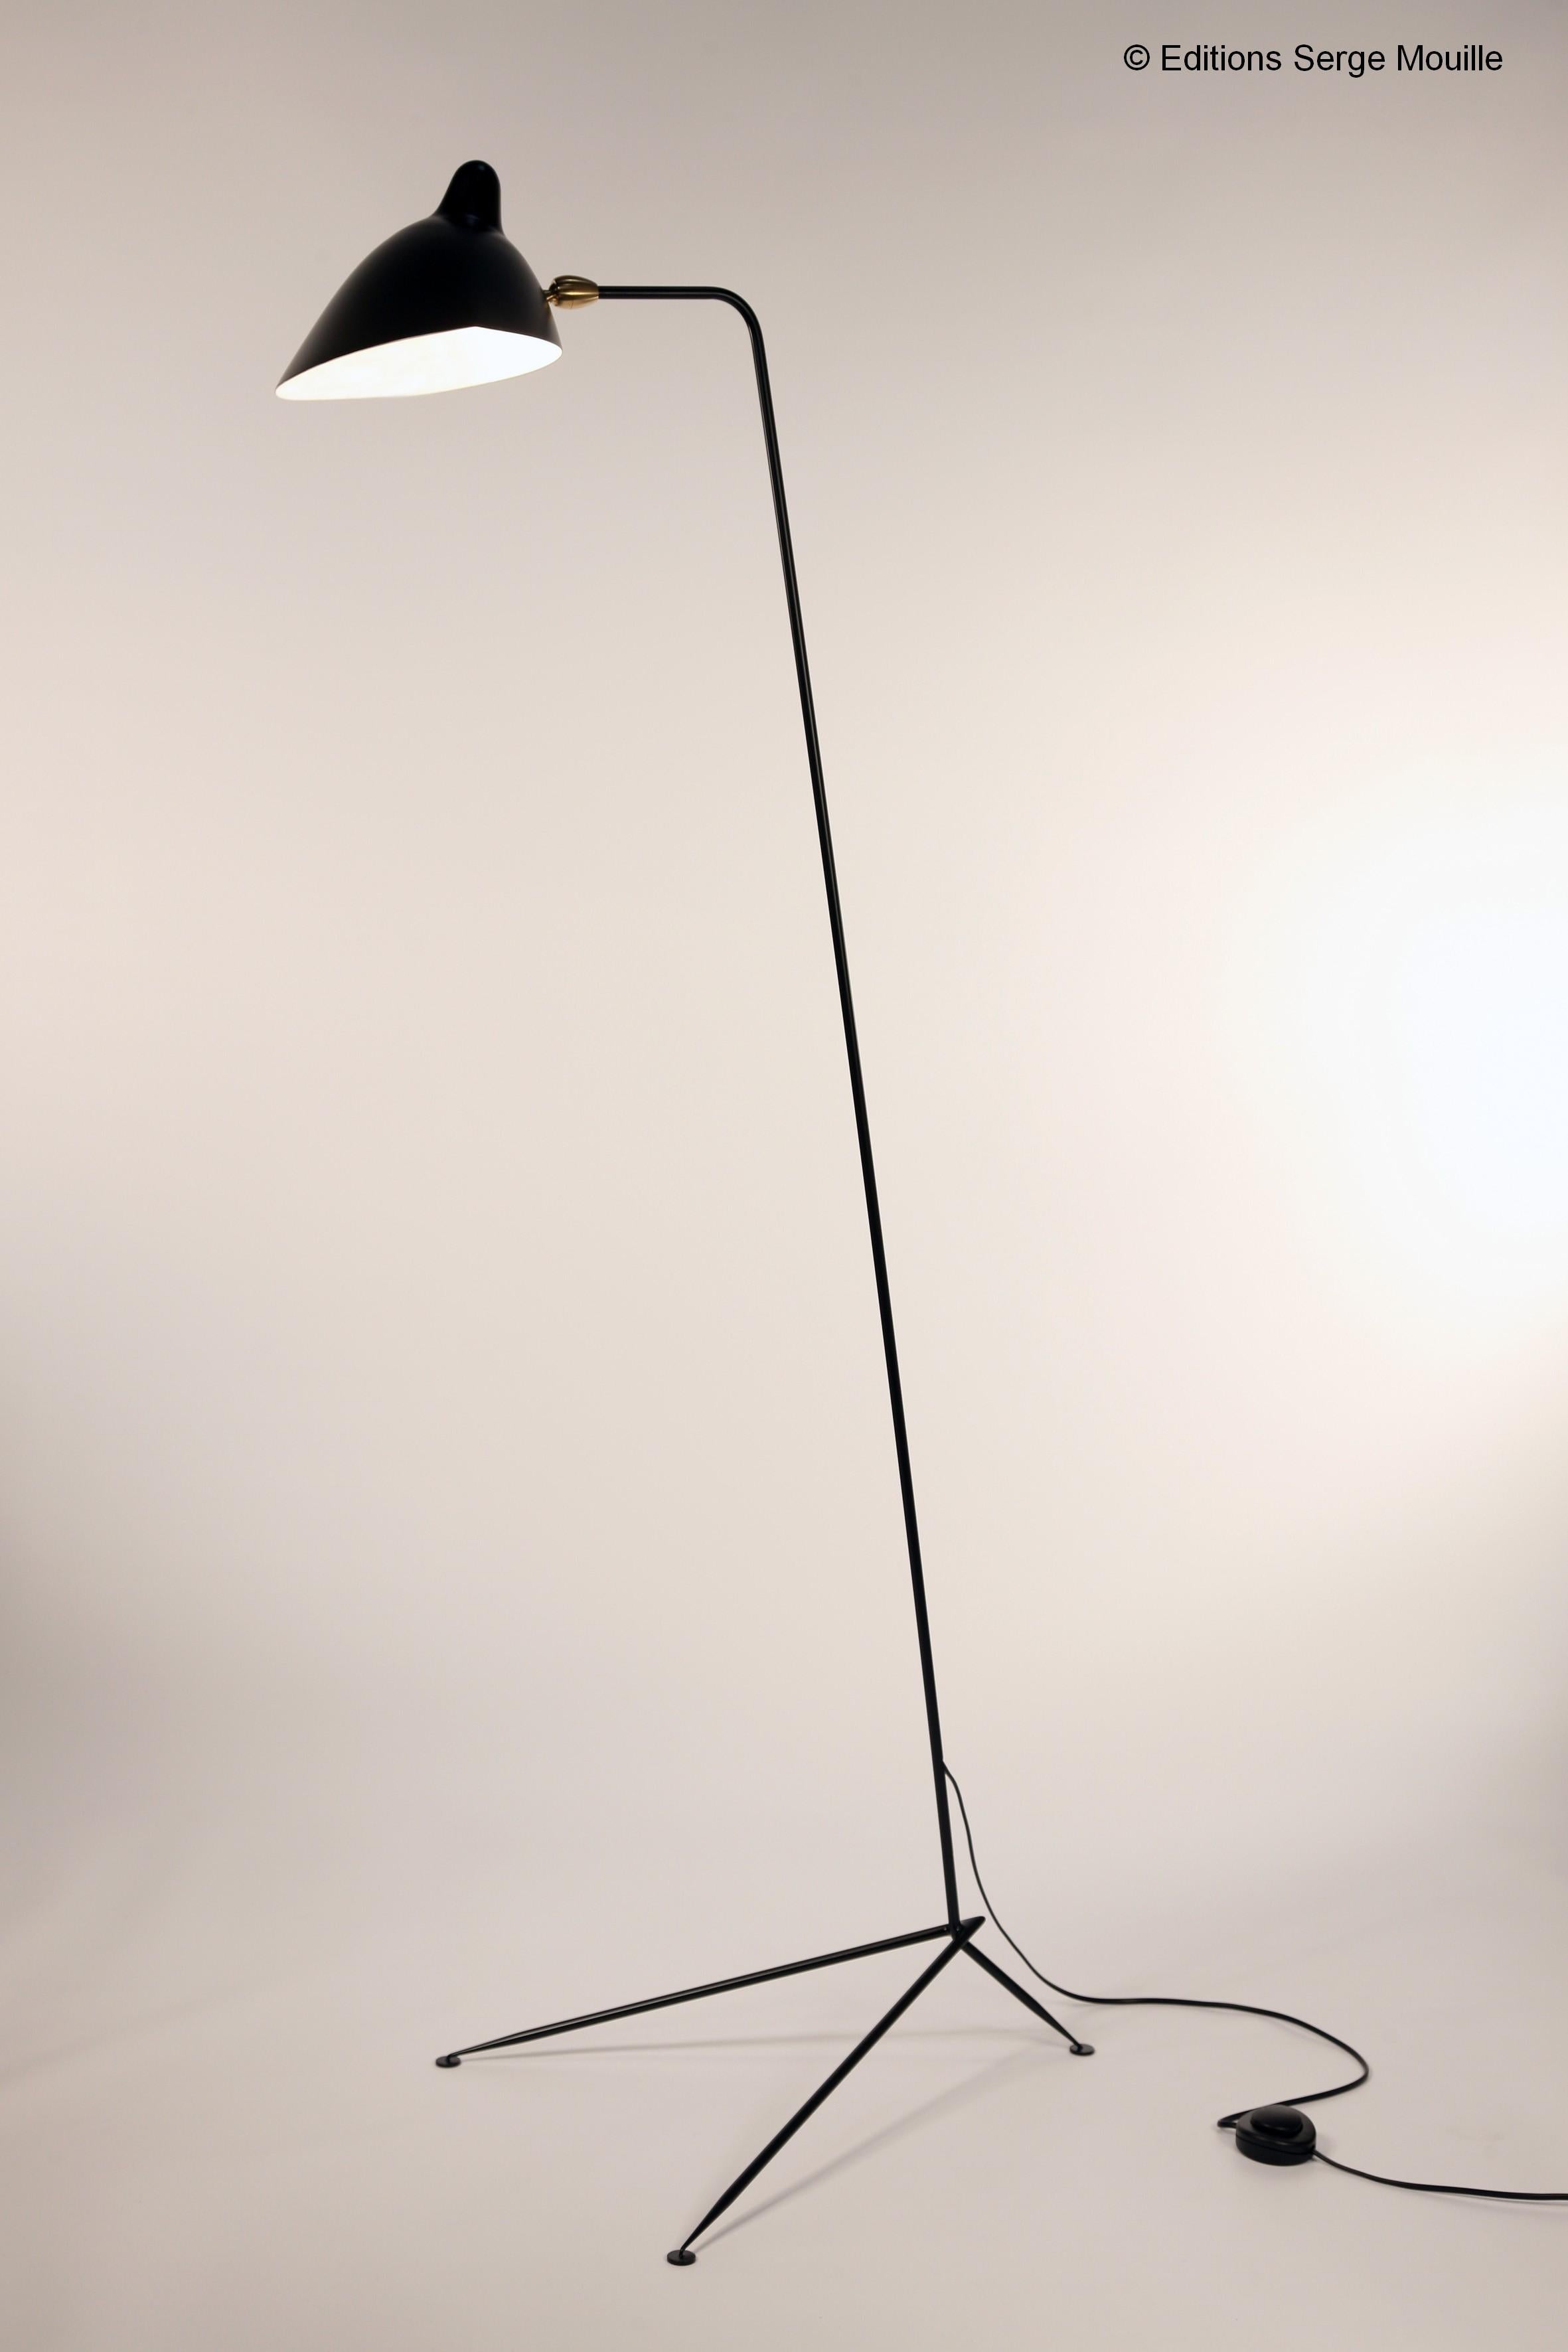 Editions Serge Mouille 'Lampadaire Droit' floor lamp in black. Originally designed in 1953, this iconic lamp is still made by Editions Serge Mouille in France using many of the same small-scale manufacturing techniques and scrupulous attention to